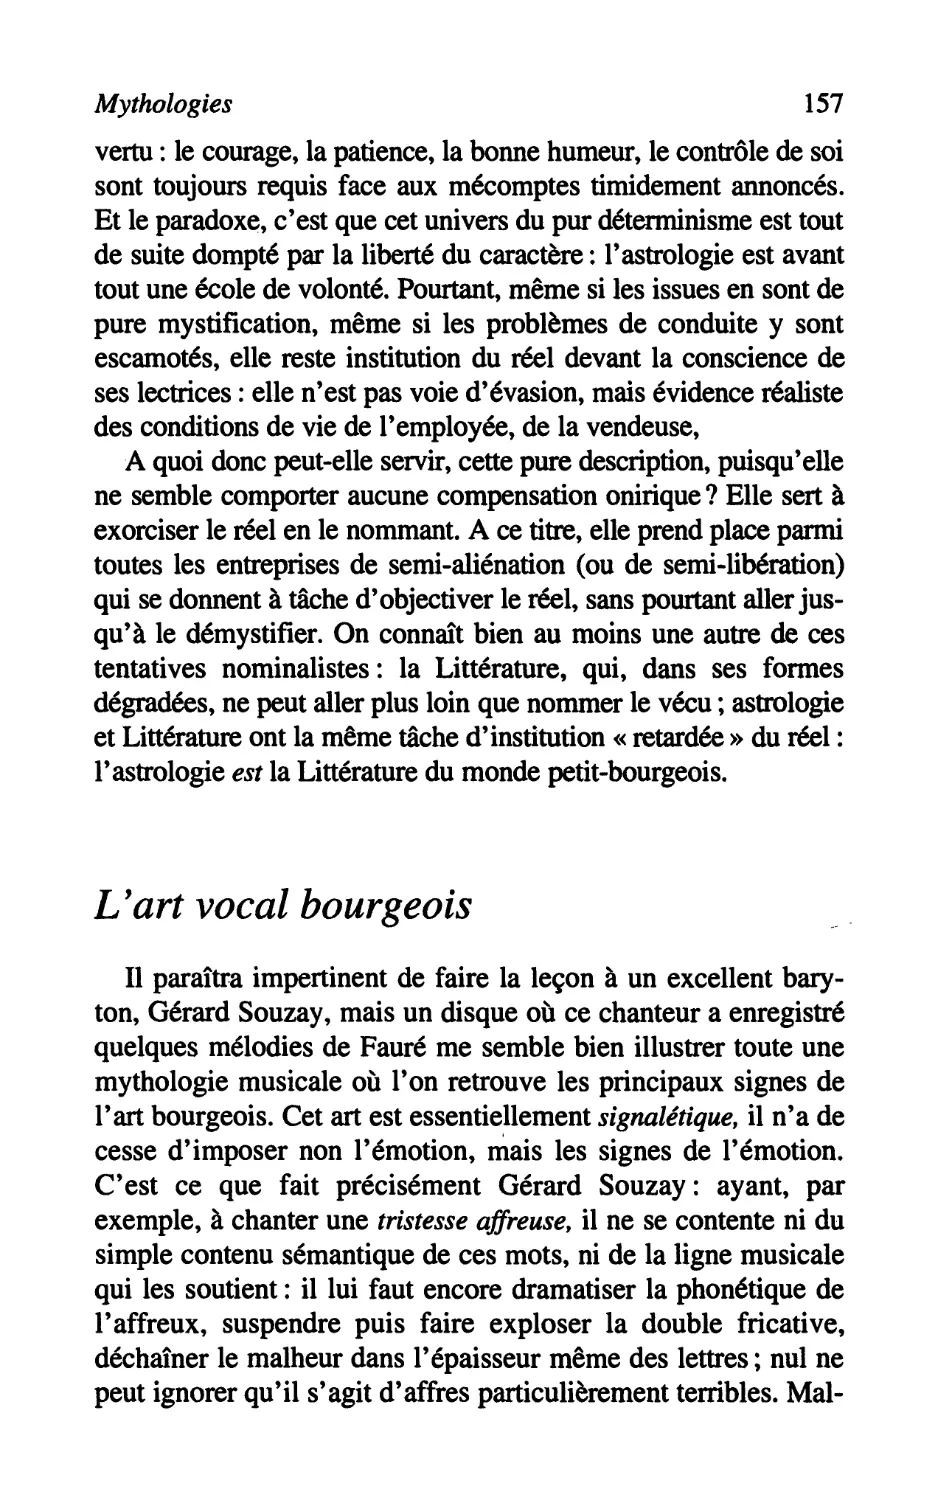 L'art vocal bourgeois